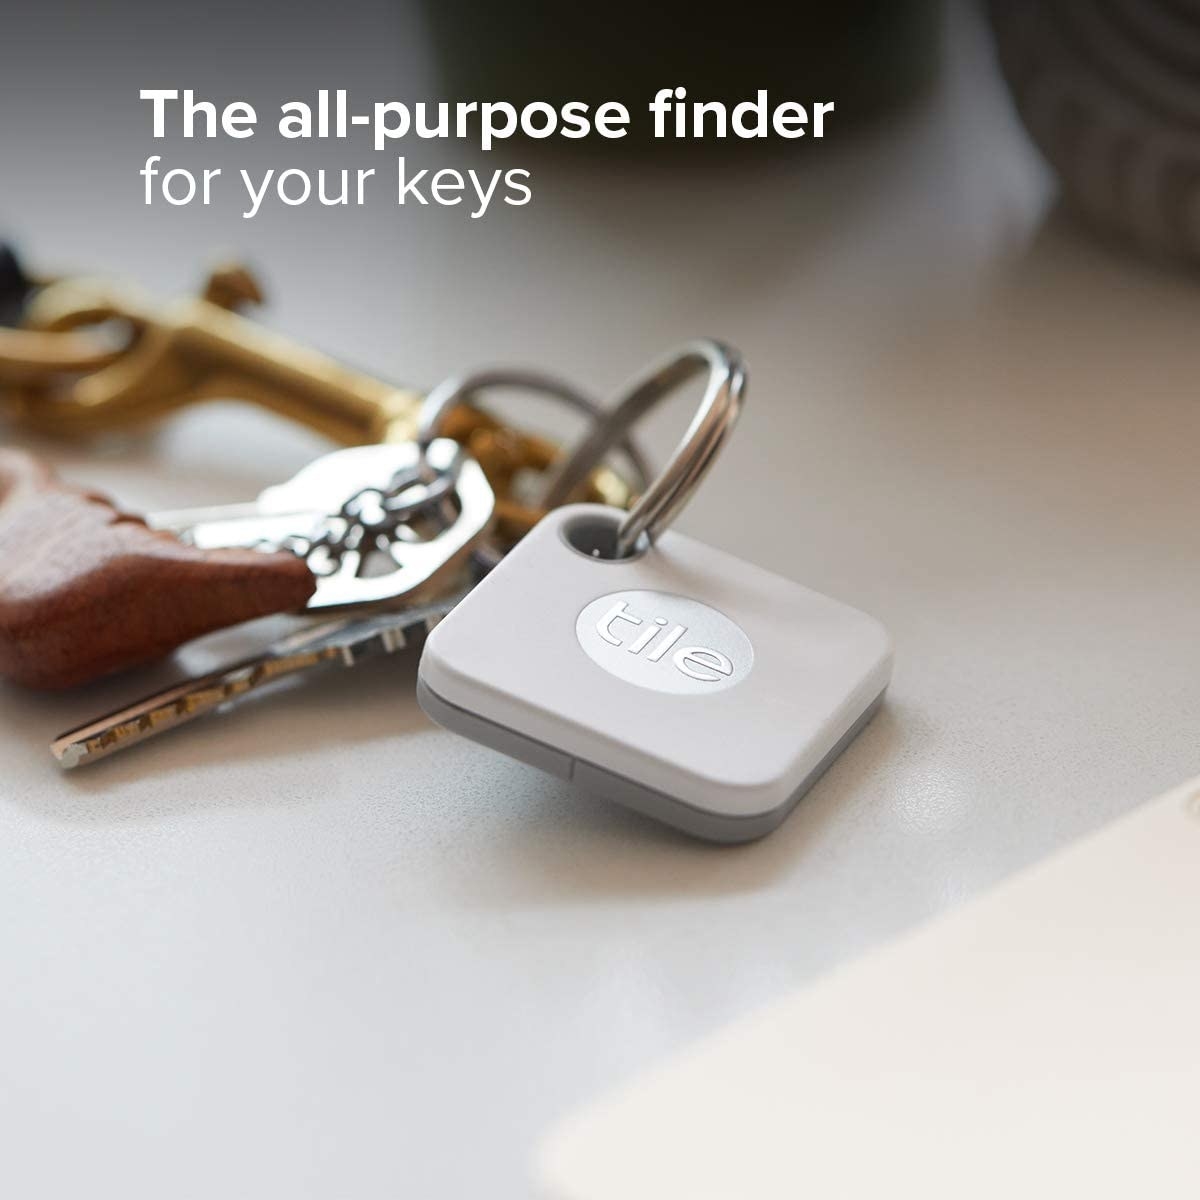 The white square tracker attached to a keychain